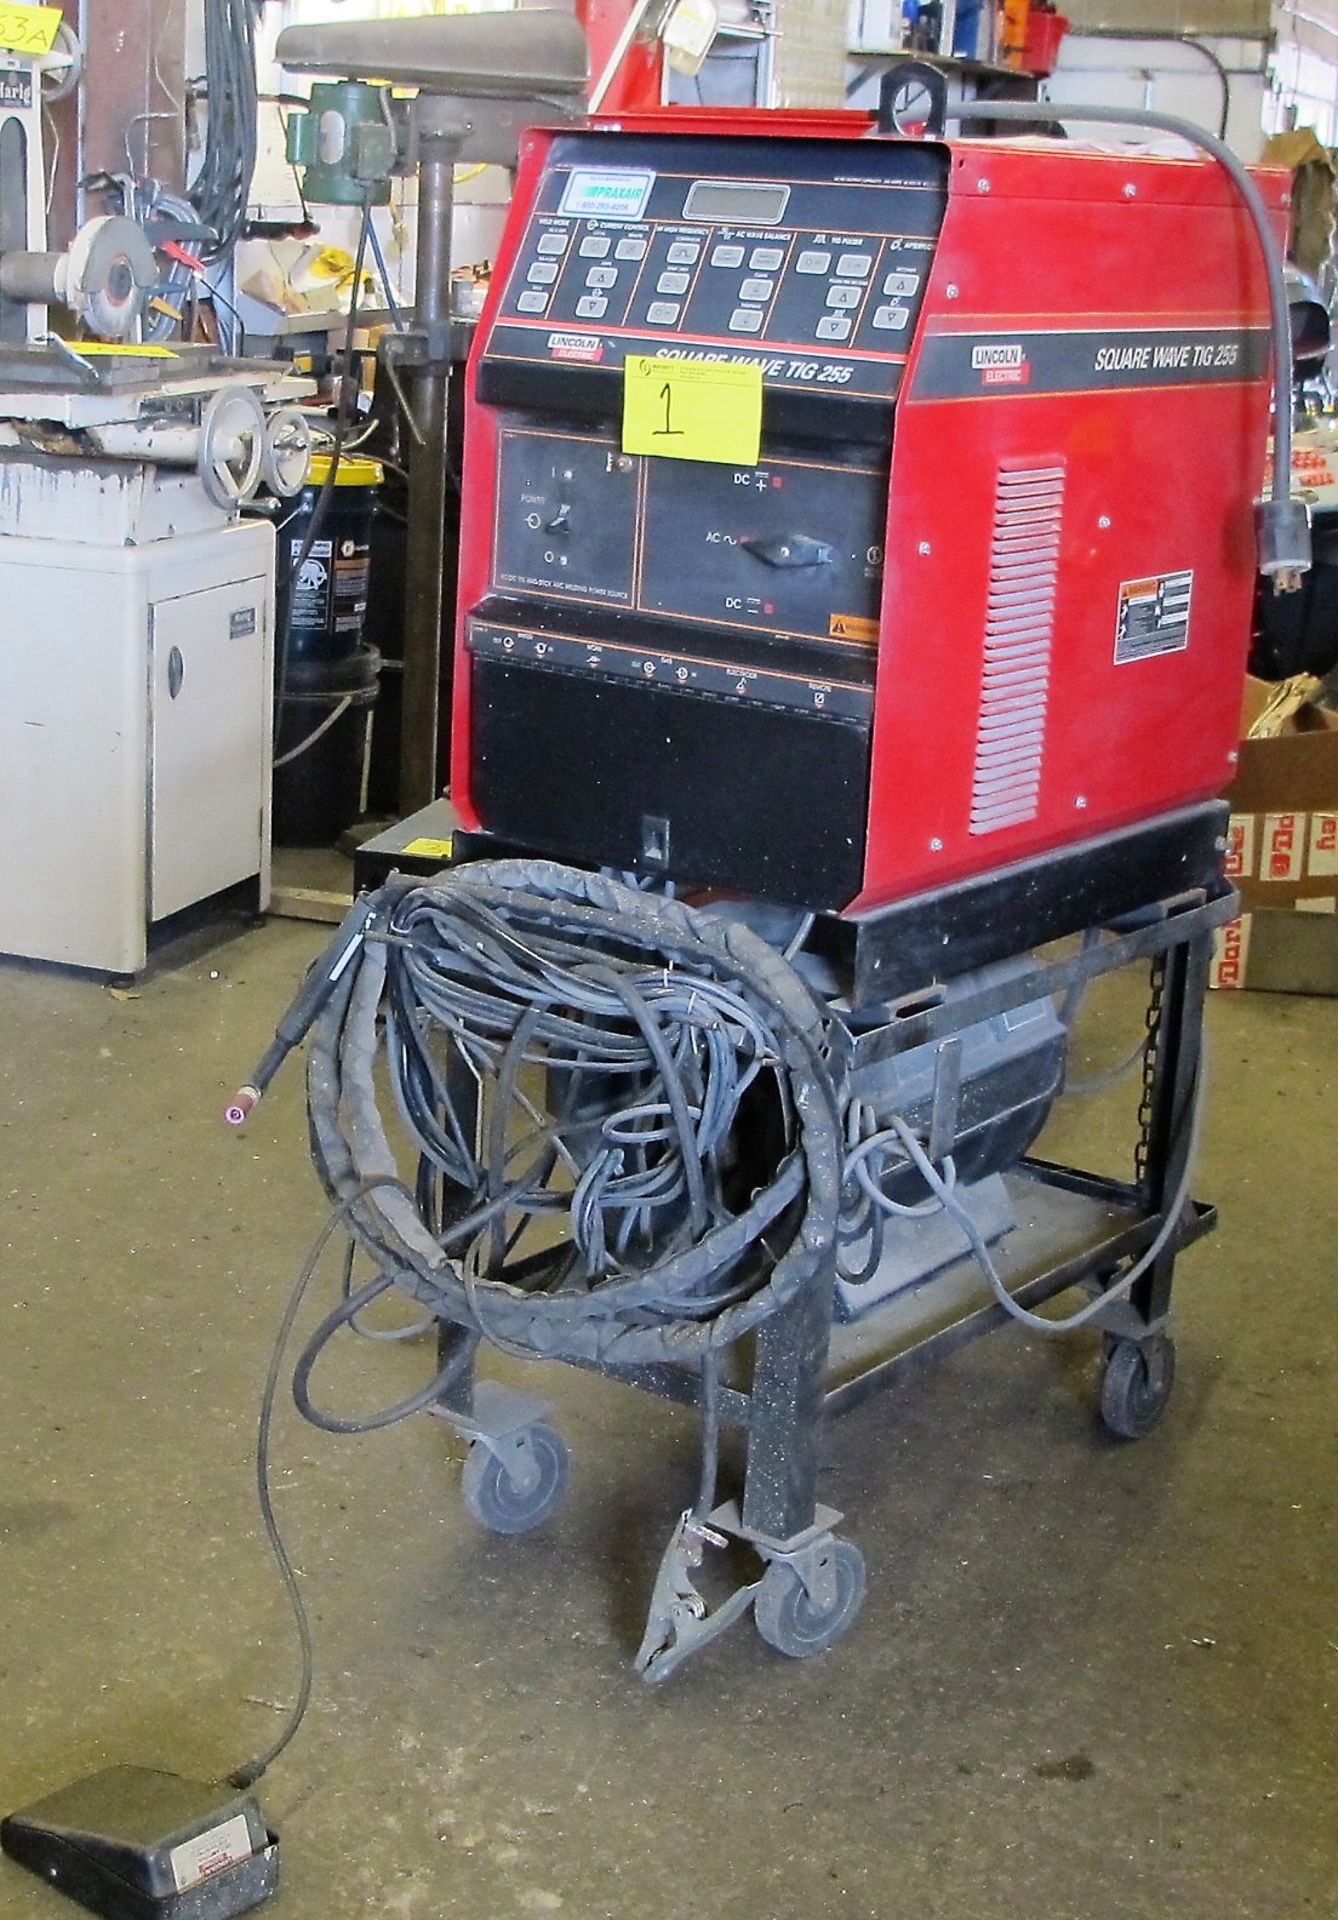 LINCOLN ELECTRIC SQUARE WAVE TIG 255 WELDER W/LA105939 COOLING SYSTEM, CART AND CABLES